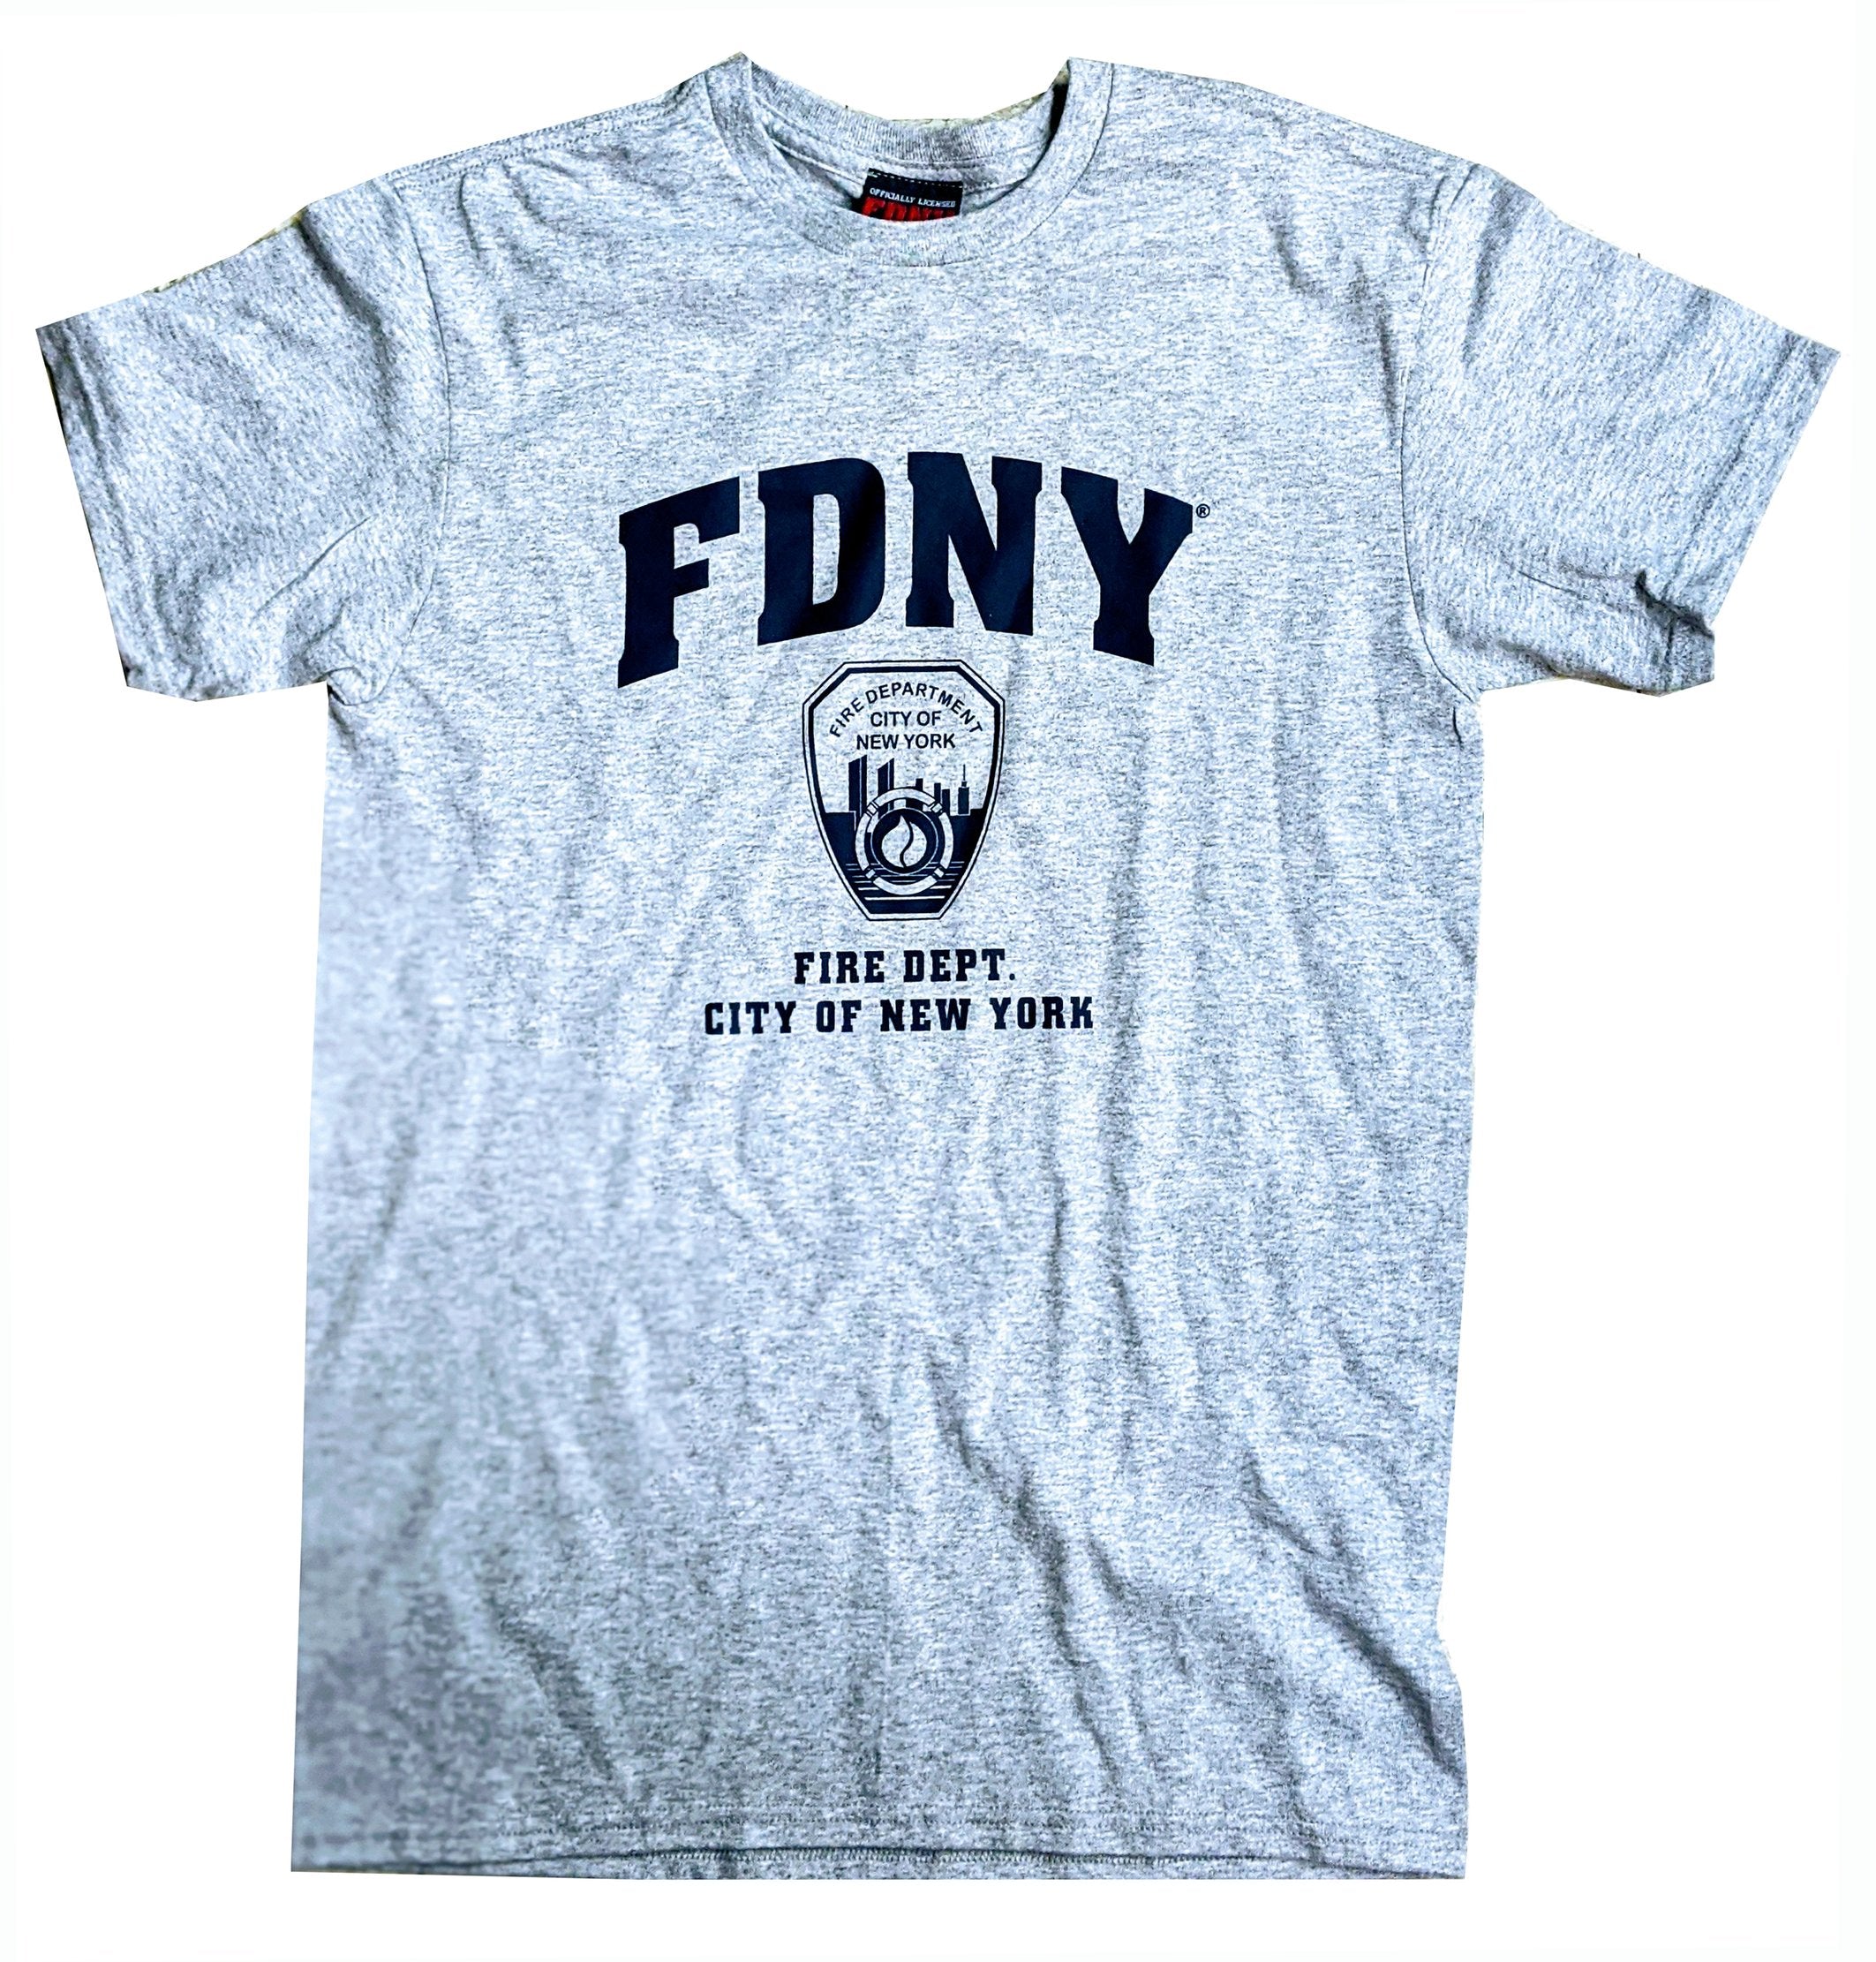 FDNY Kids Tee Offical T-Shirt Gray Boys Youth Size Novelty Shirt